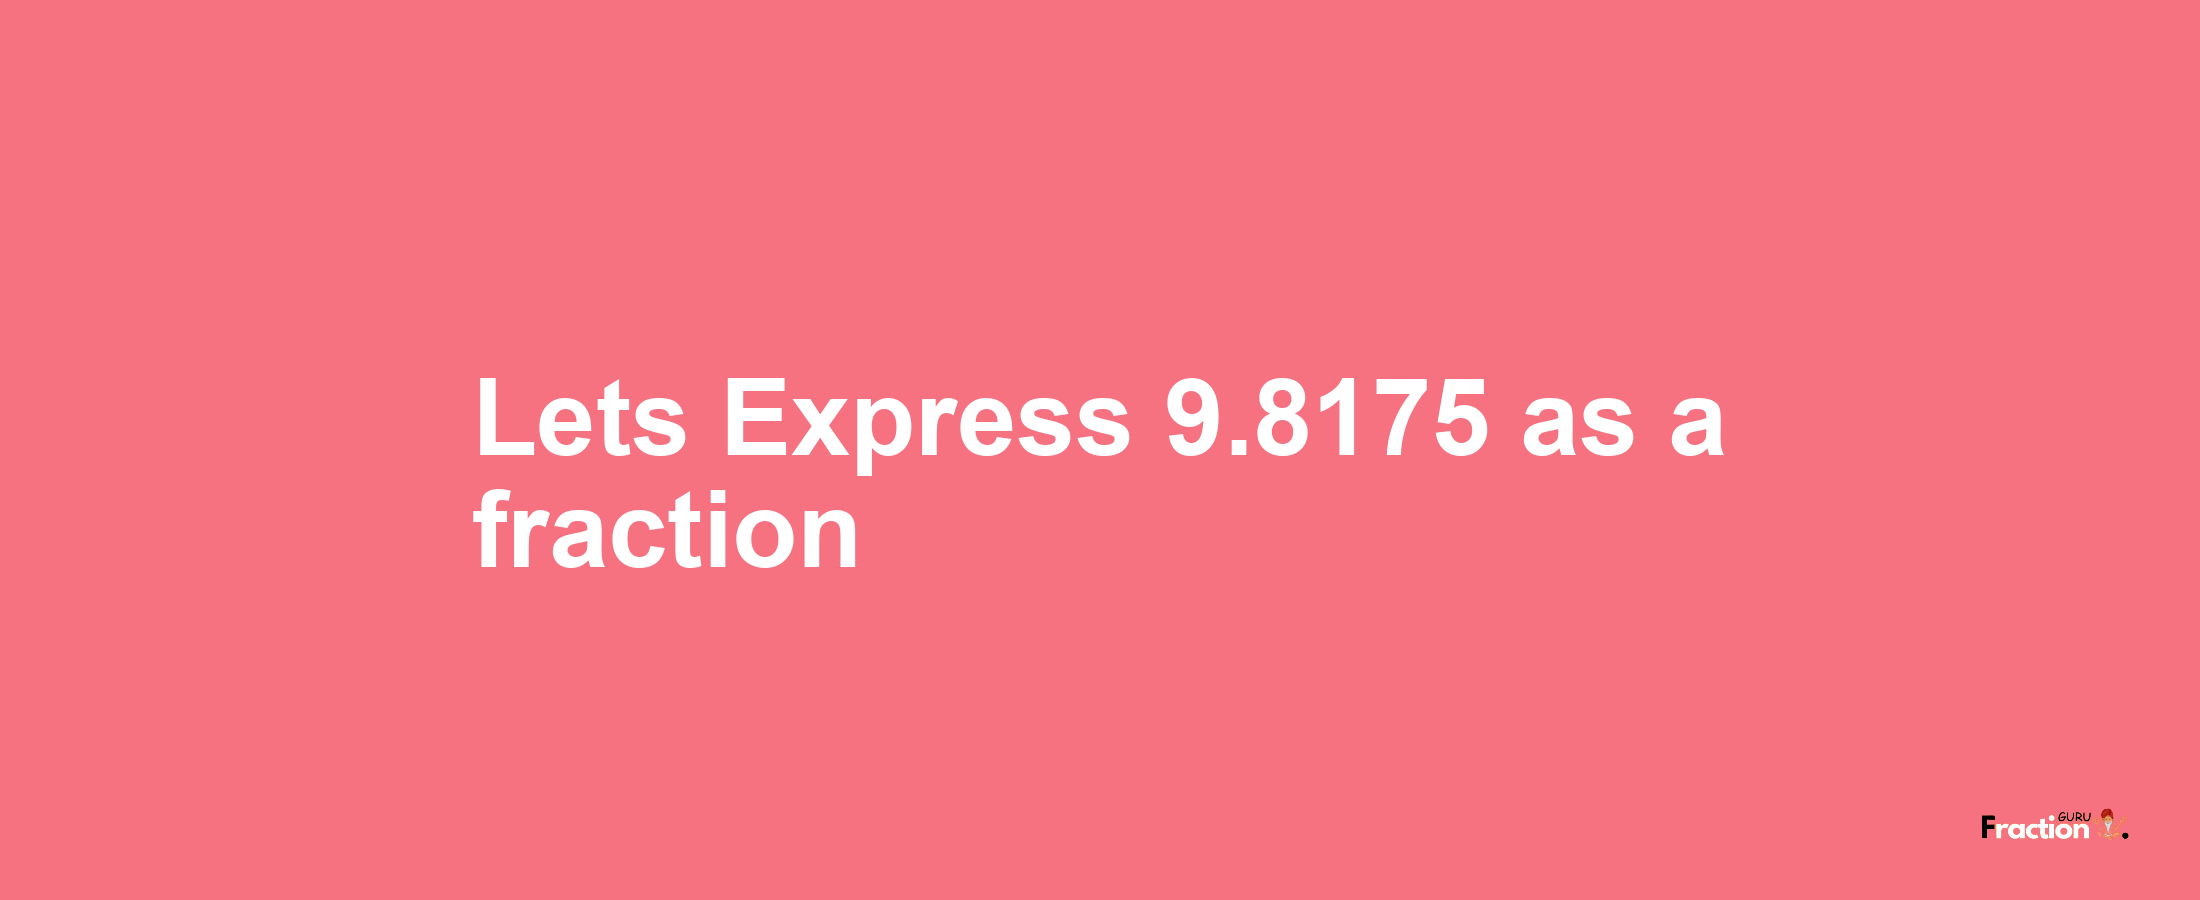 Lets Express 9.8175 as afraction